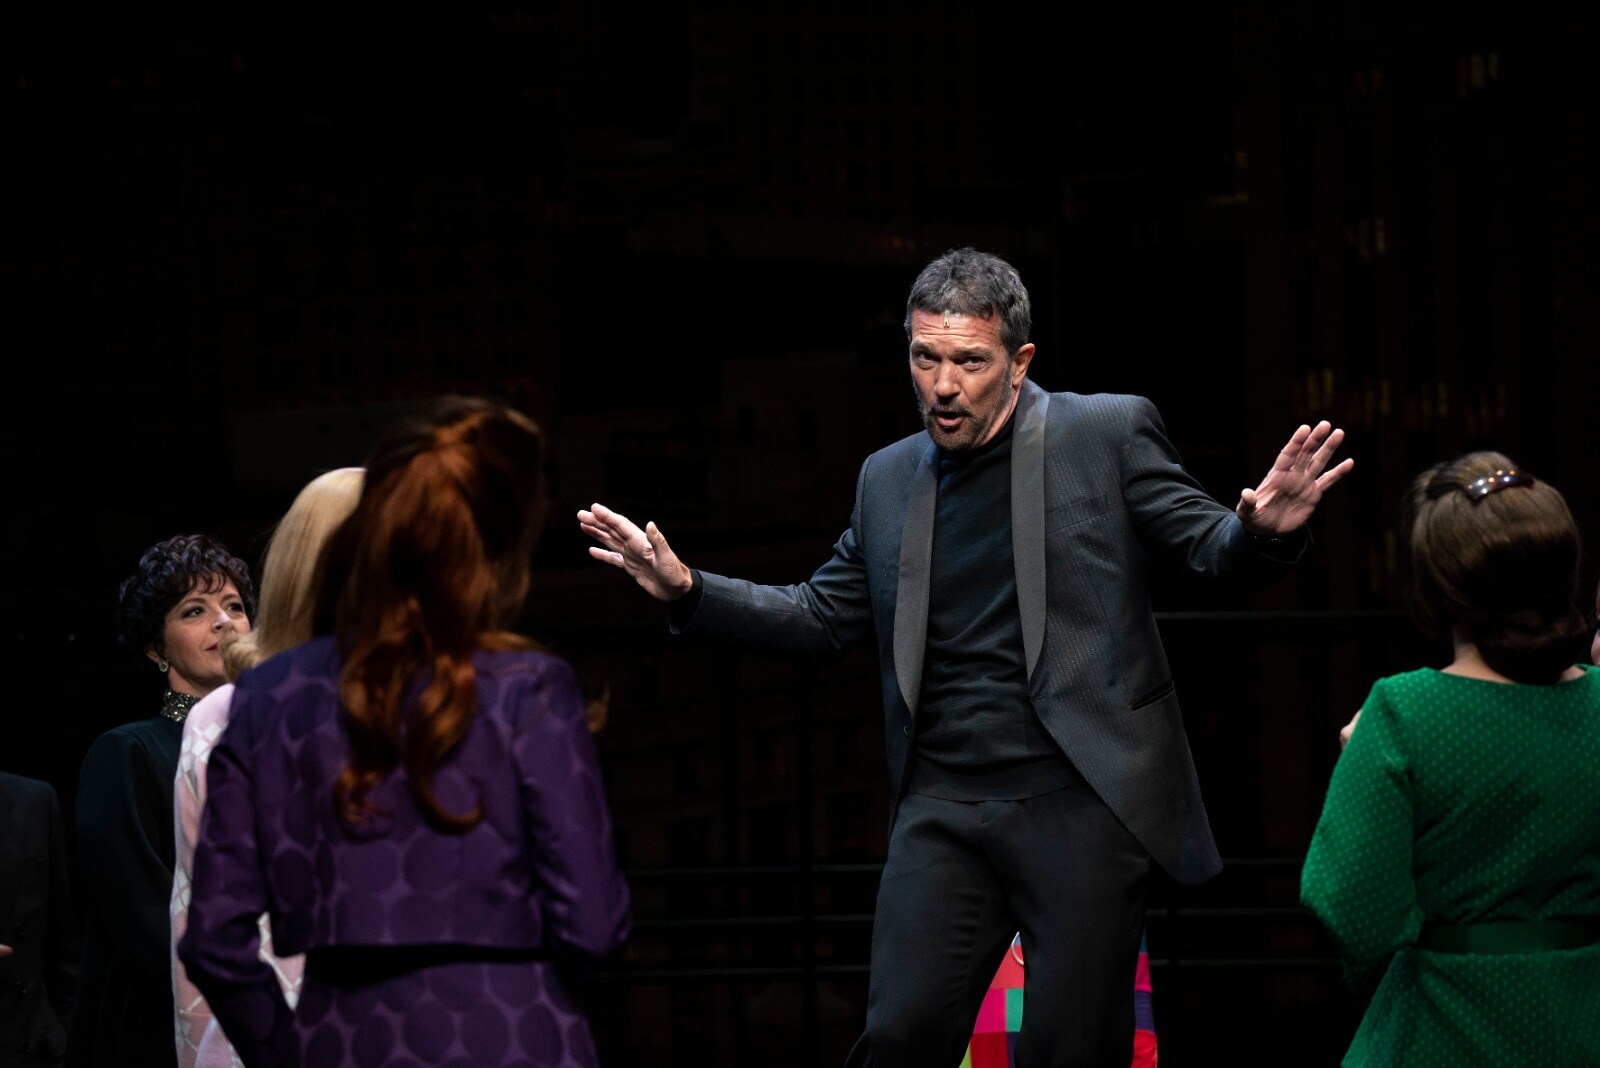 Antonio Banderas stars in the show that brings Broadway glitter to the Soho theatre